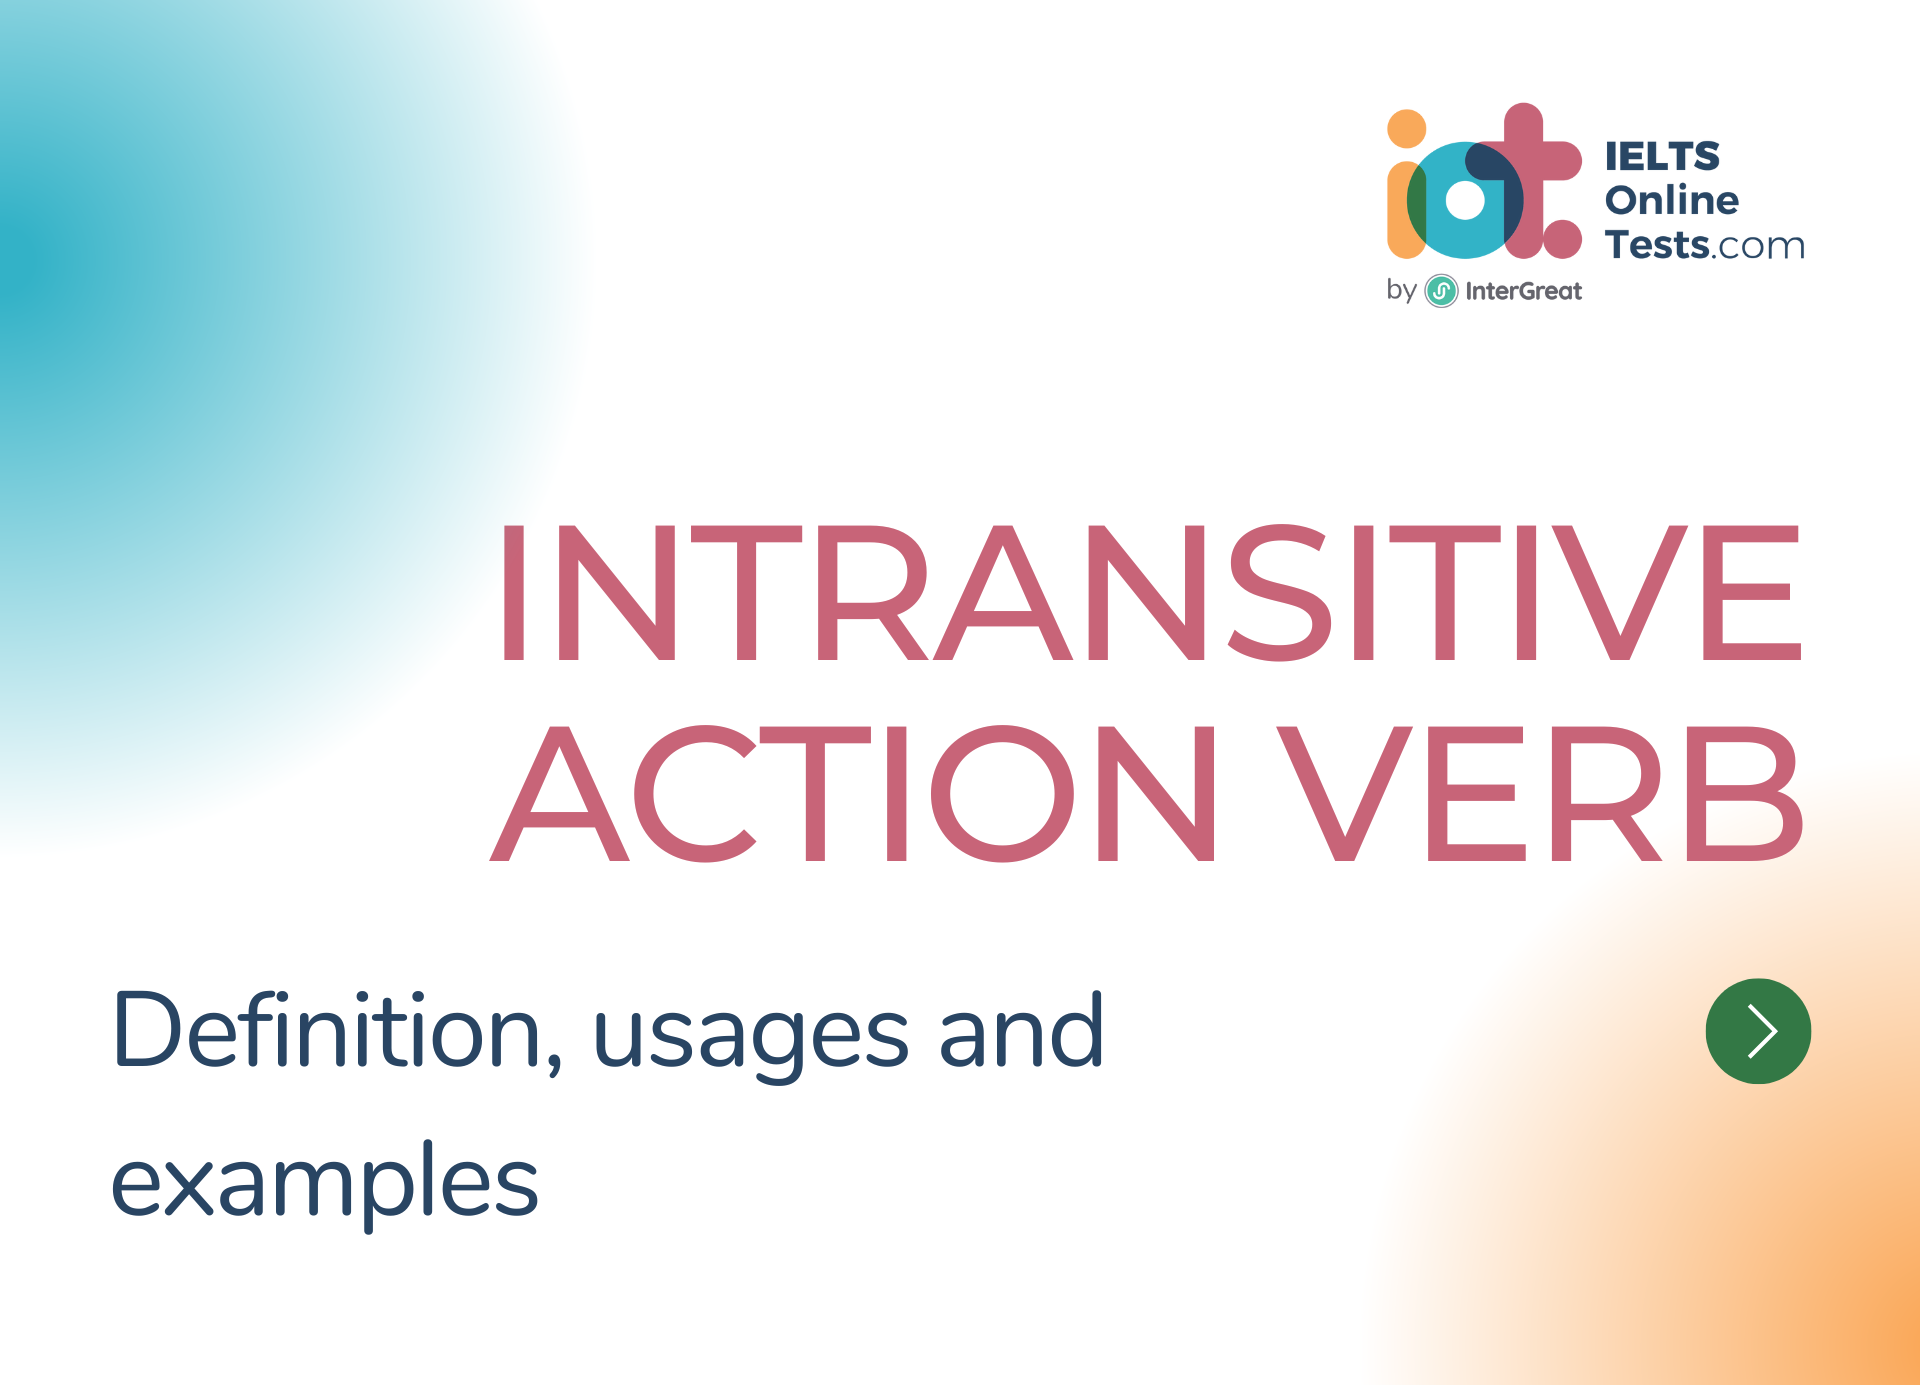 Intransitive action verb definition, types and examples